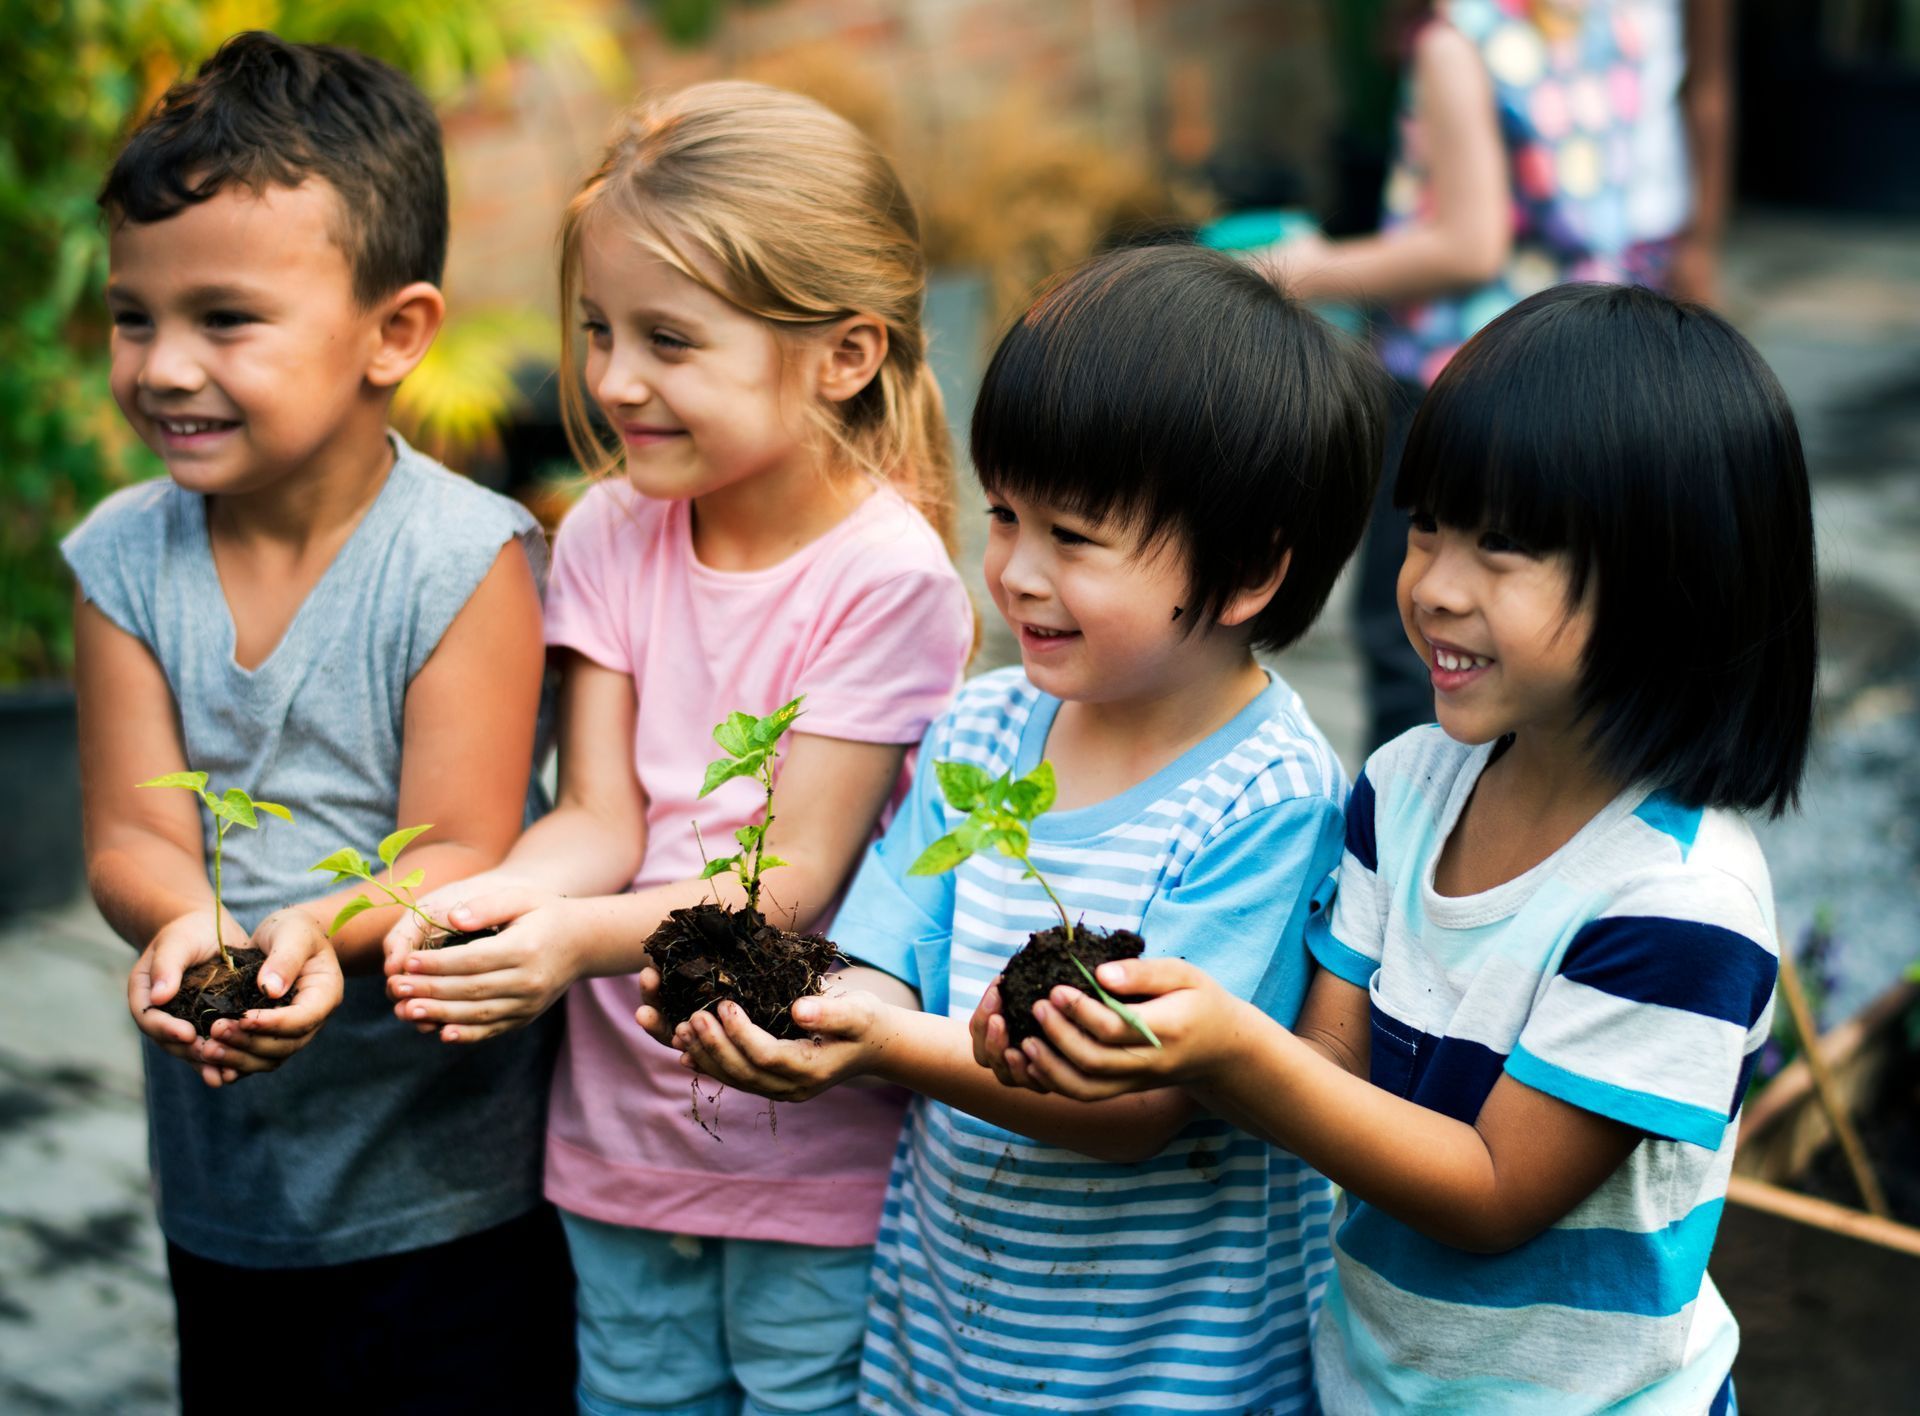 Group of four children holding seedling plants in their hands